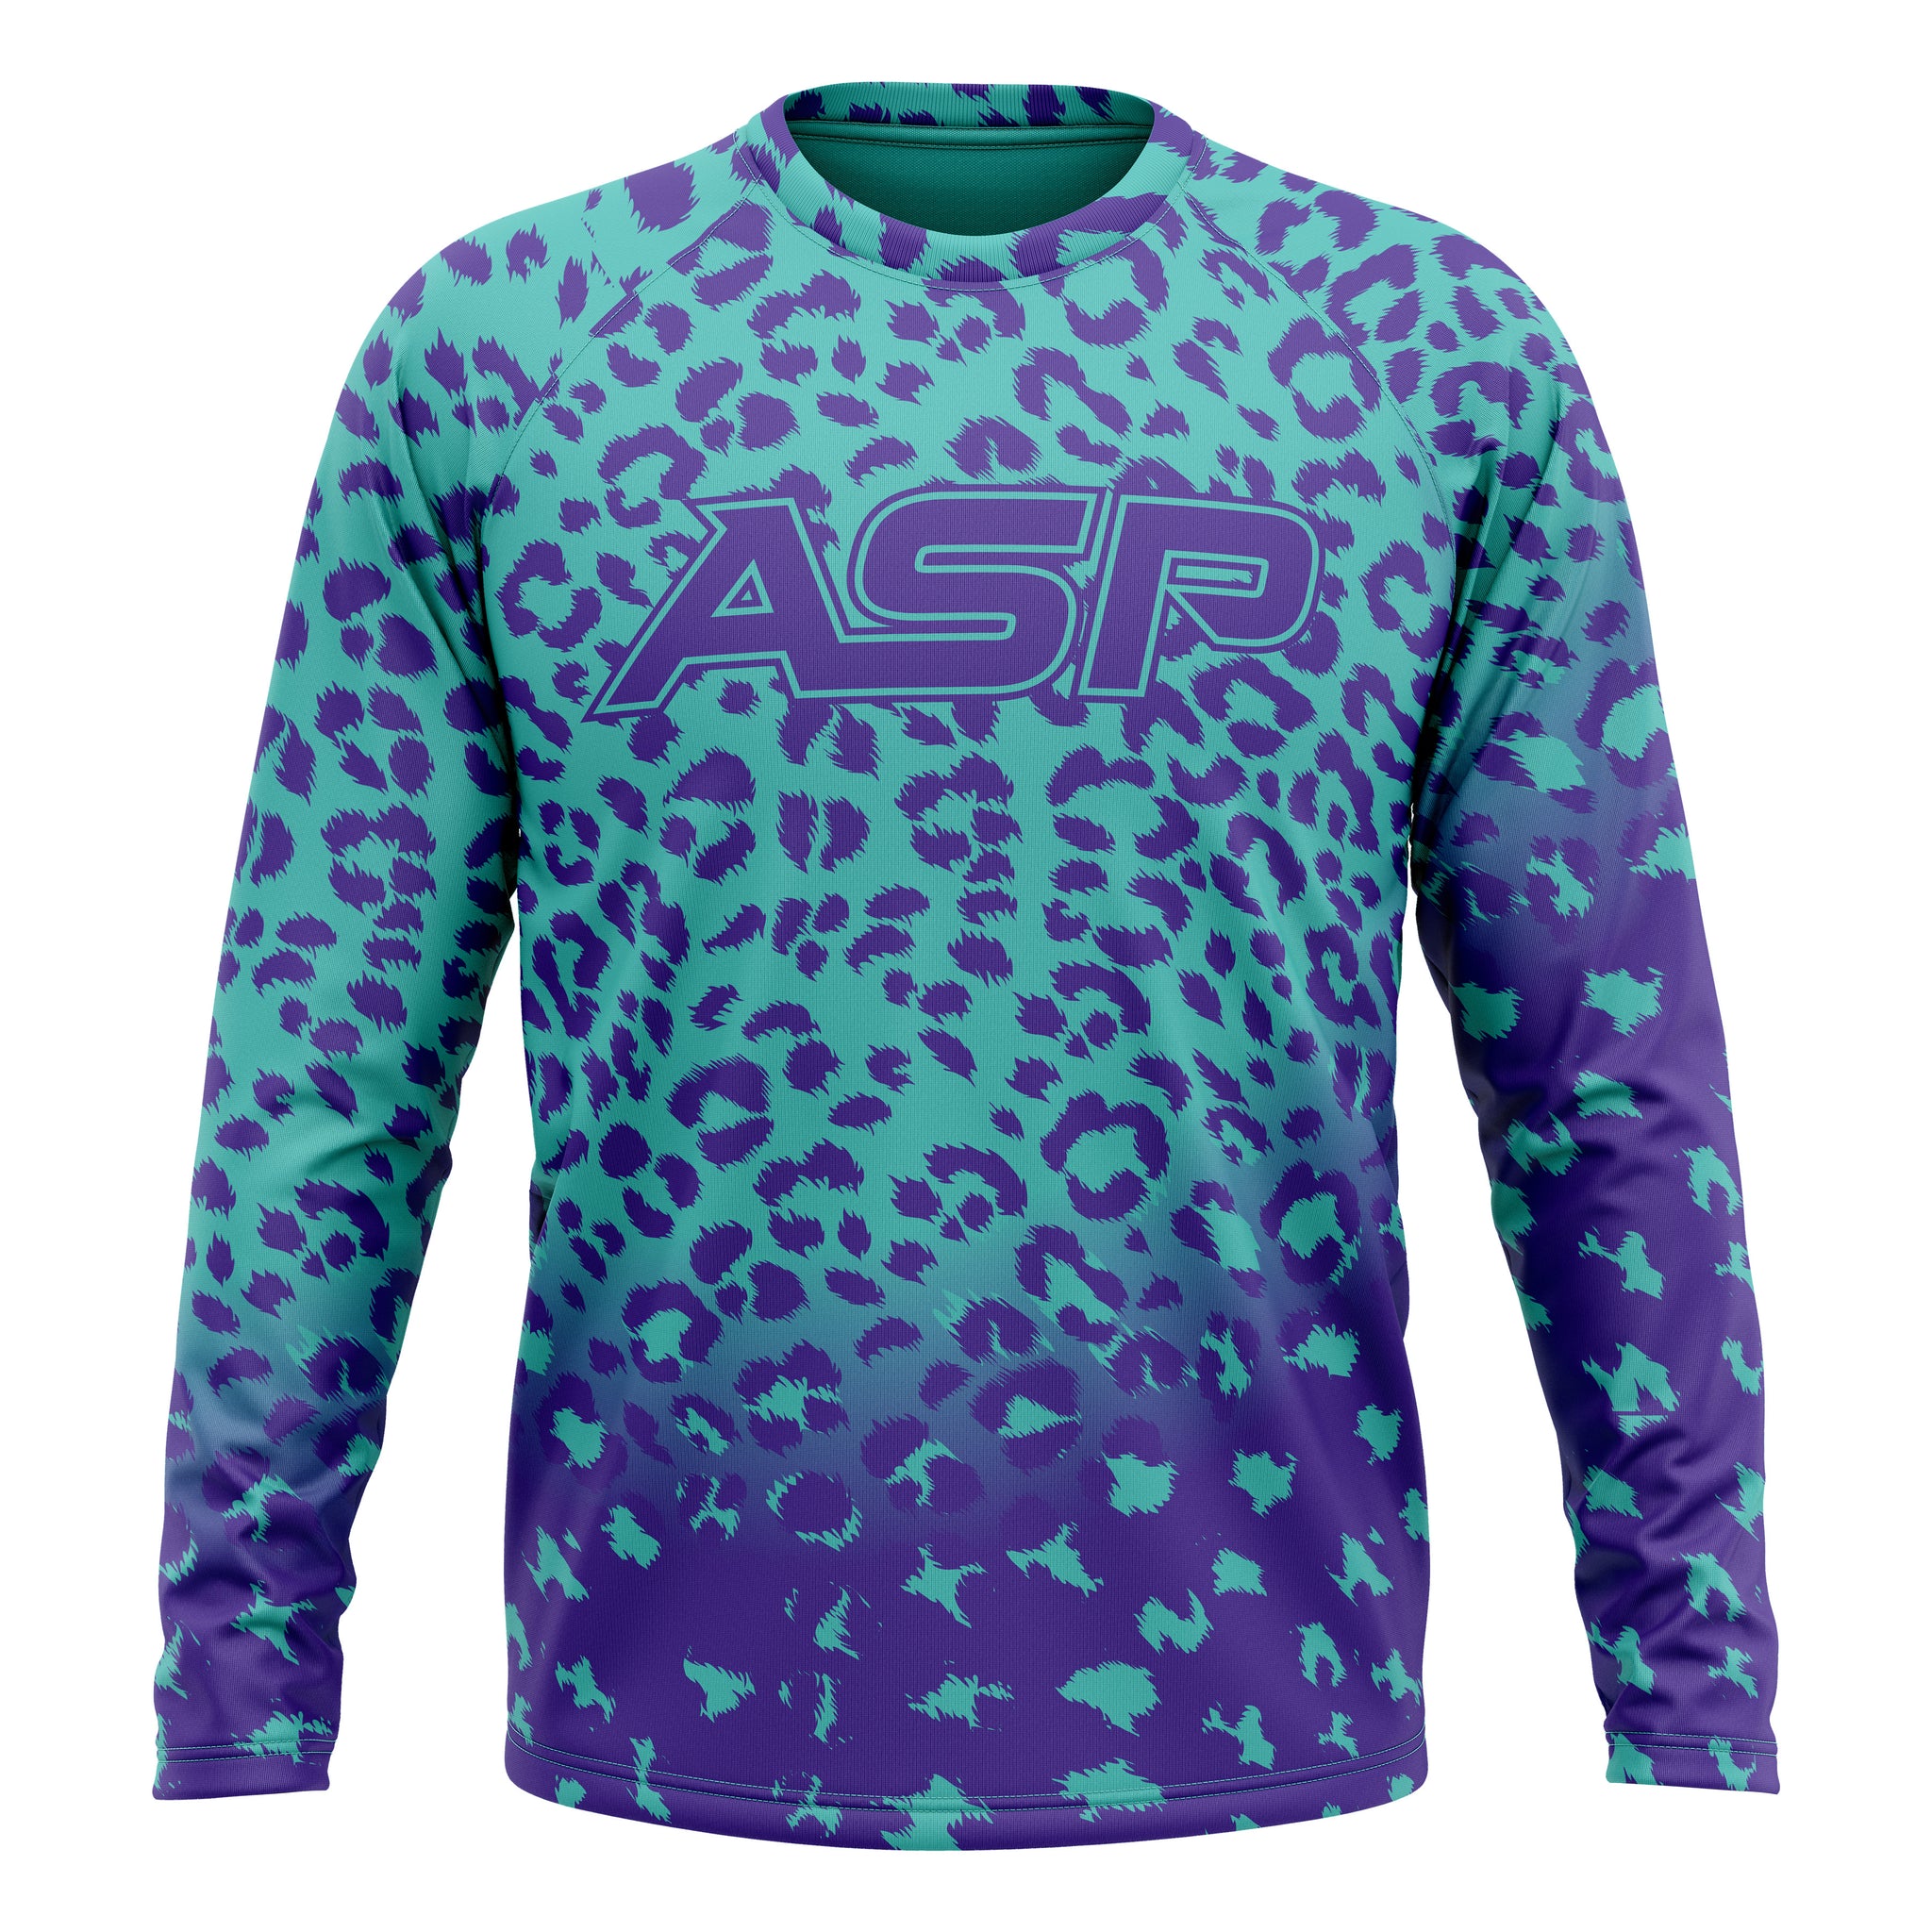 ASP Lux 2.0 Long Sleeve